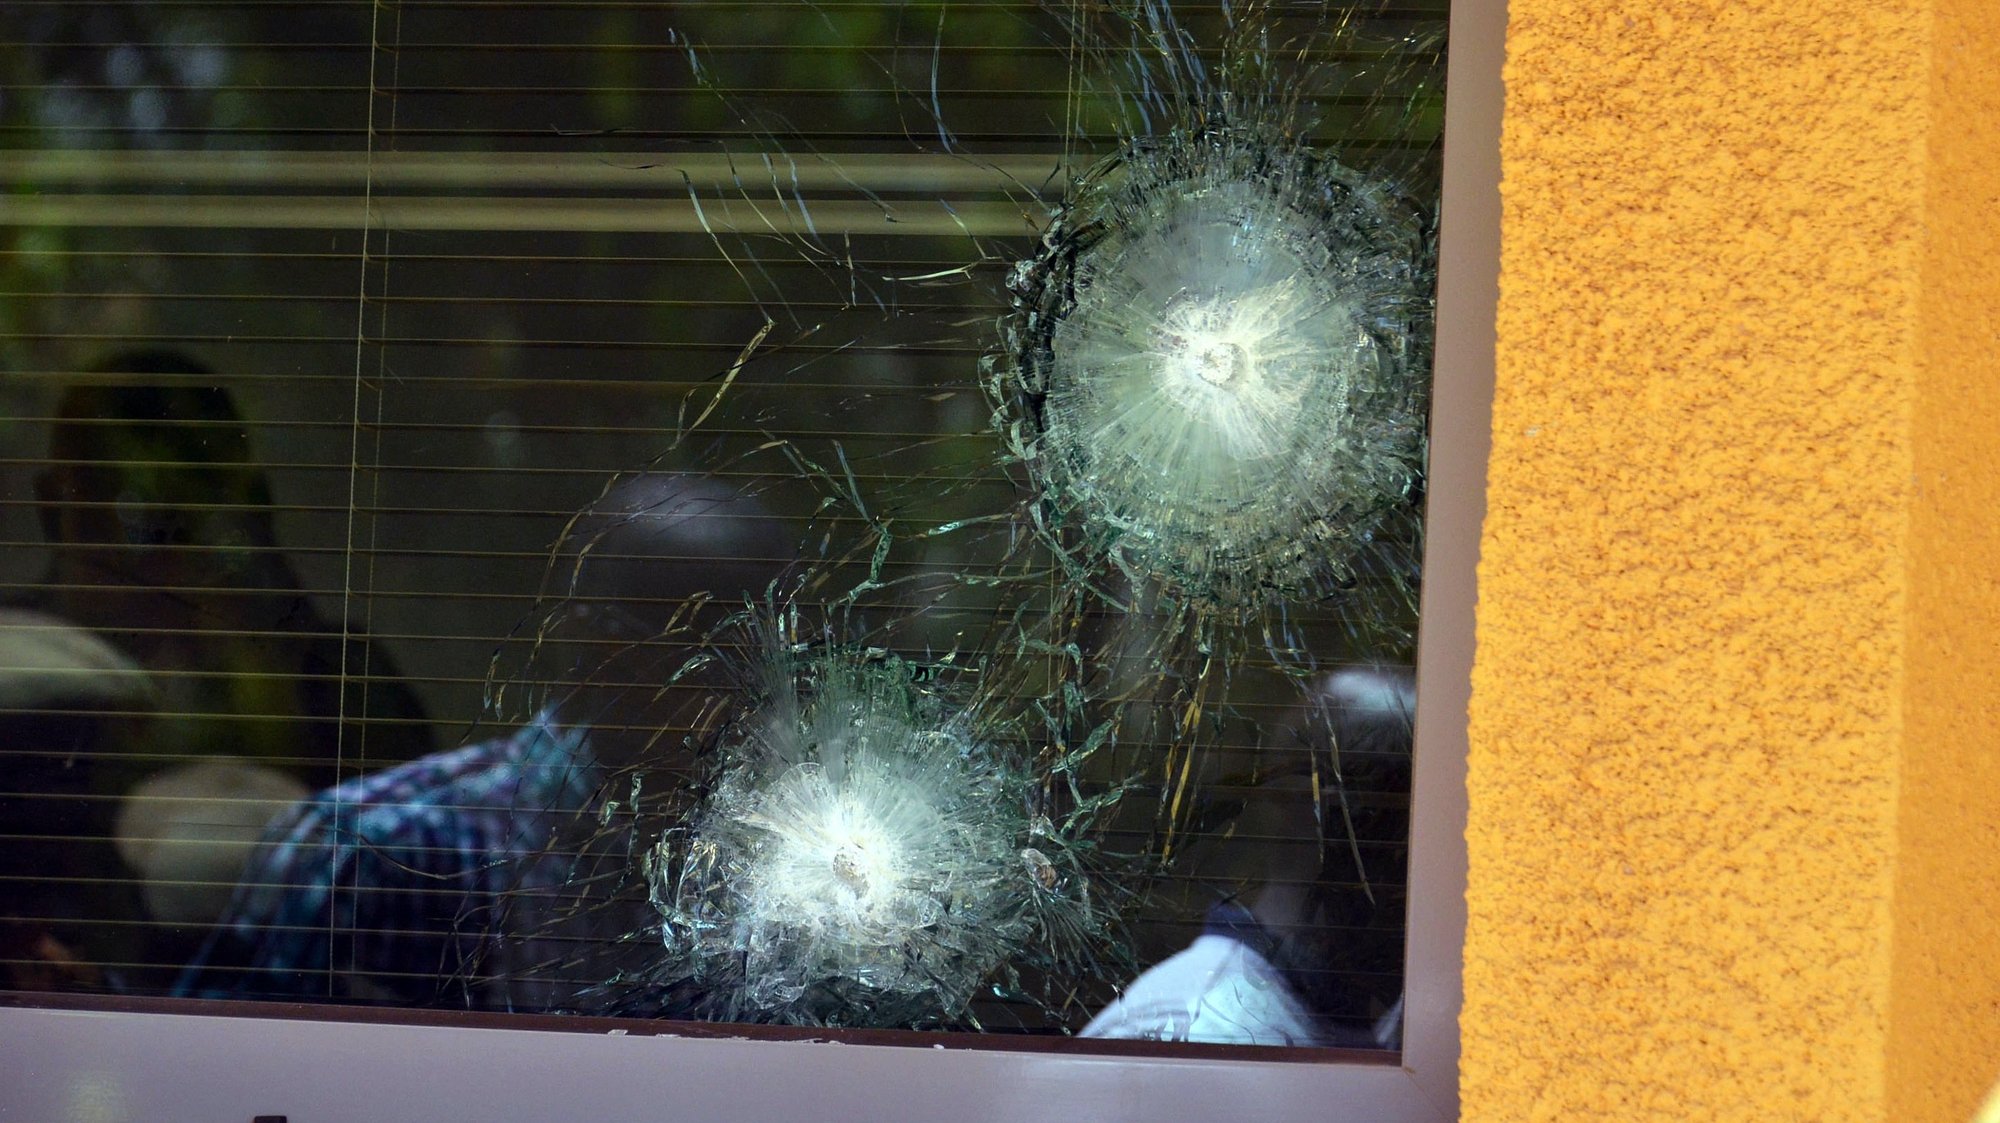 epa06577579 A bullet-shattered window at the French Embassy after an alleged terrorist attacks in the capital Ouagadougou, Burkina Faso, 03 March 2018. According to reports at least 28 people have been killed and dozens left wounded in the attacks on the French Embassy and miltary headquarters in Ouagadougou.  EPA/LEGNAN KOULA